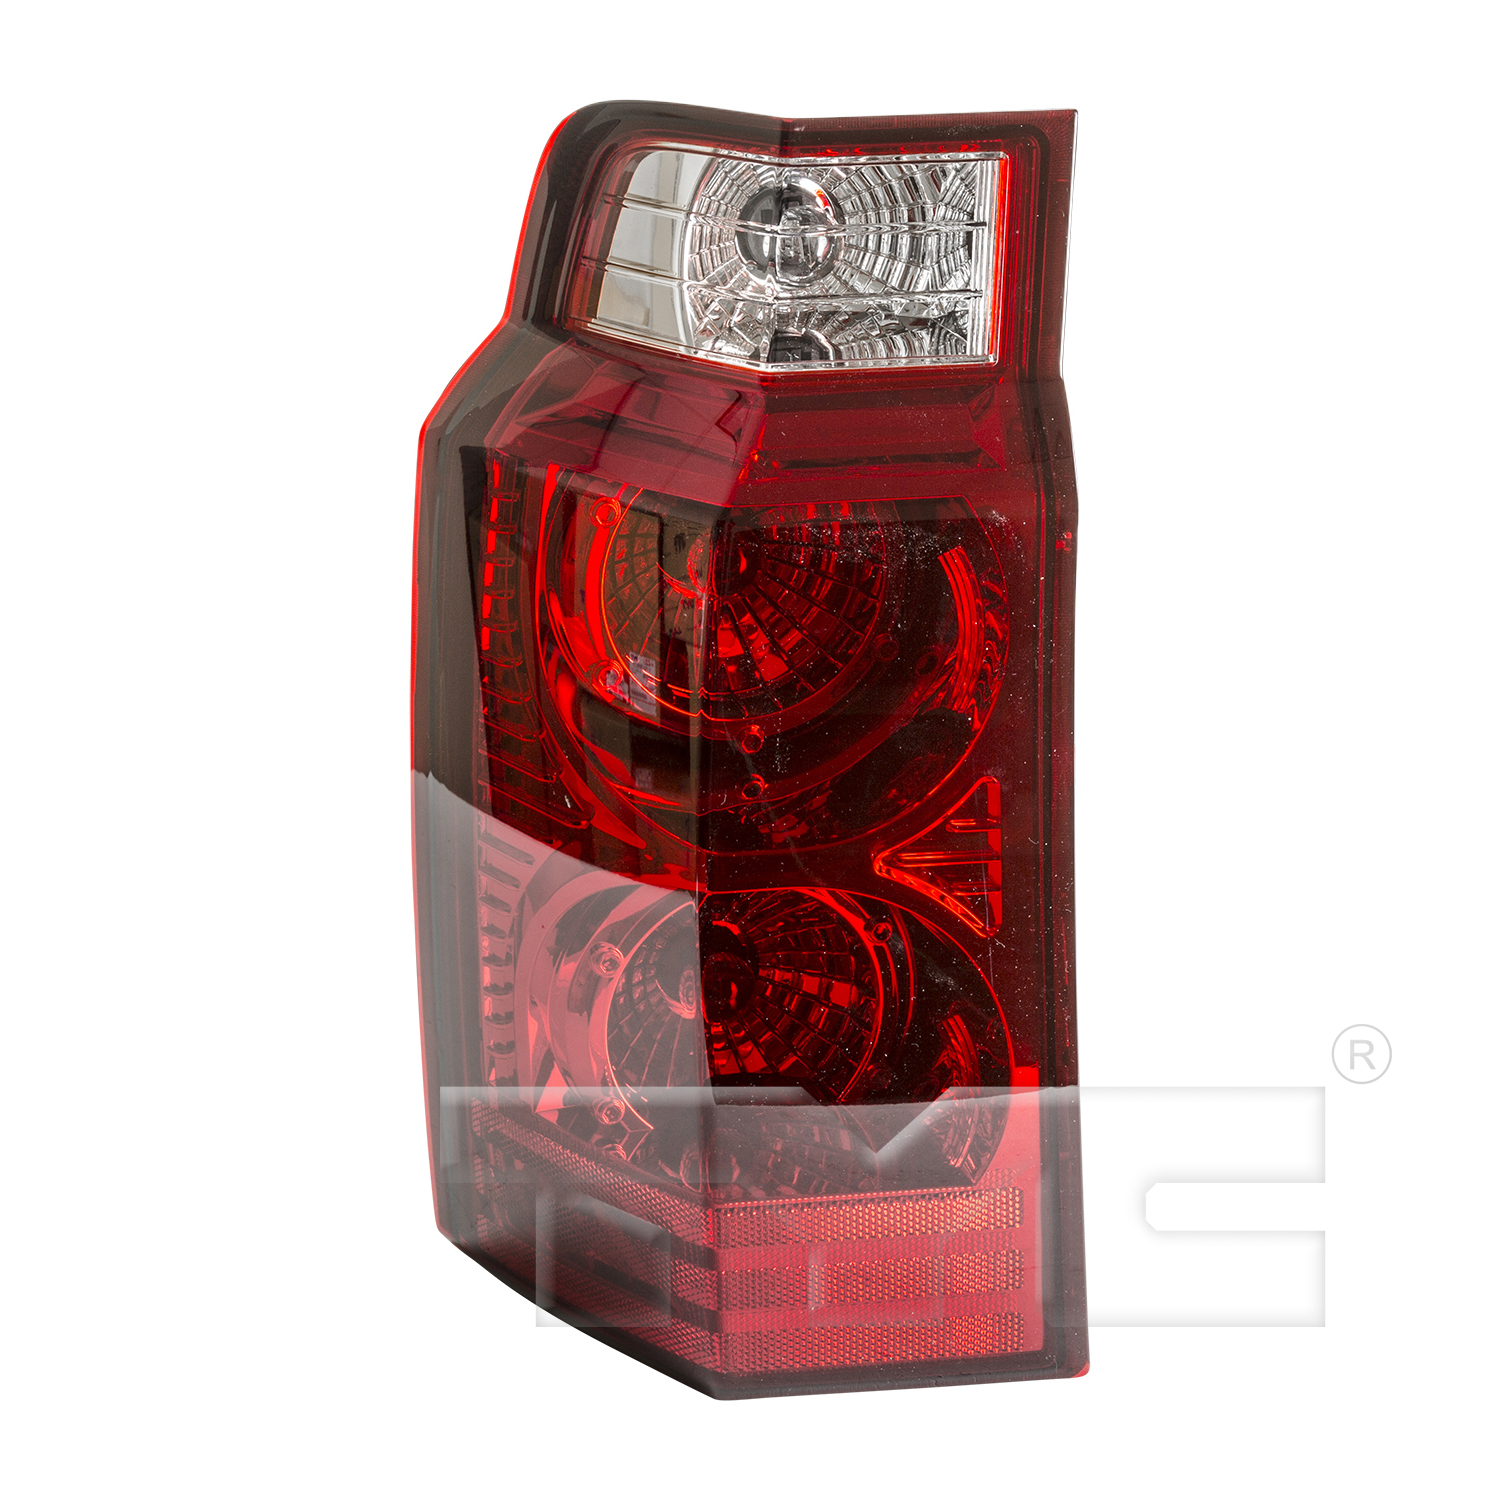 Aftermarket TAILLIGHTS for JEEP - COMMANDER, COMMANDER,06-10,LT Taillamp lens/housing